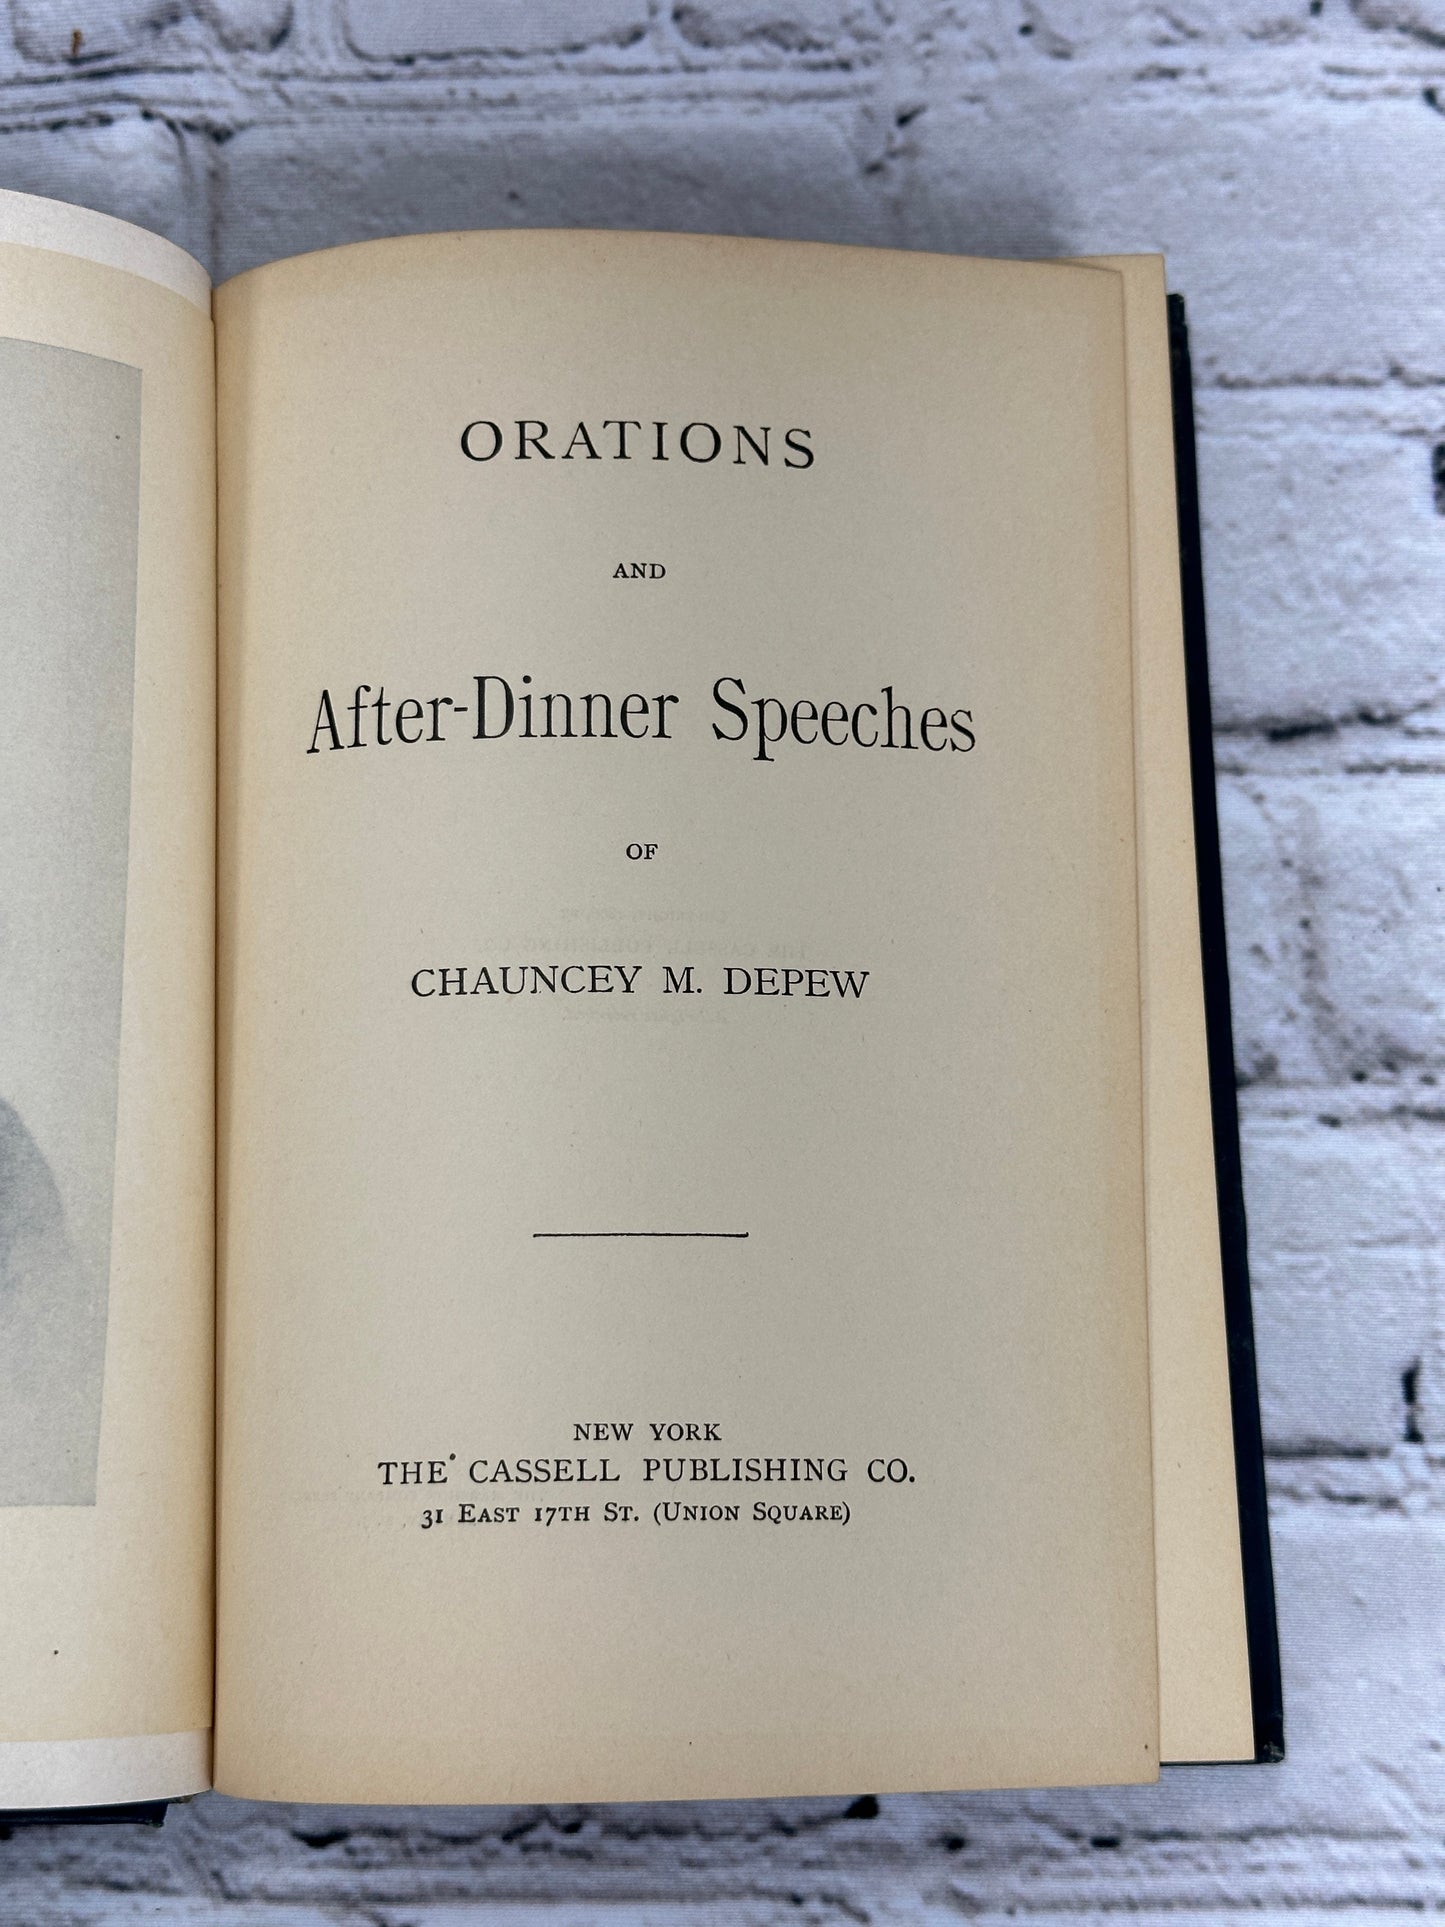 Orations and After Dinner Speeches by Chauncey Depew [1896]